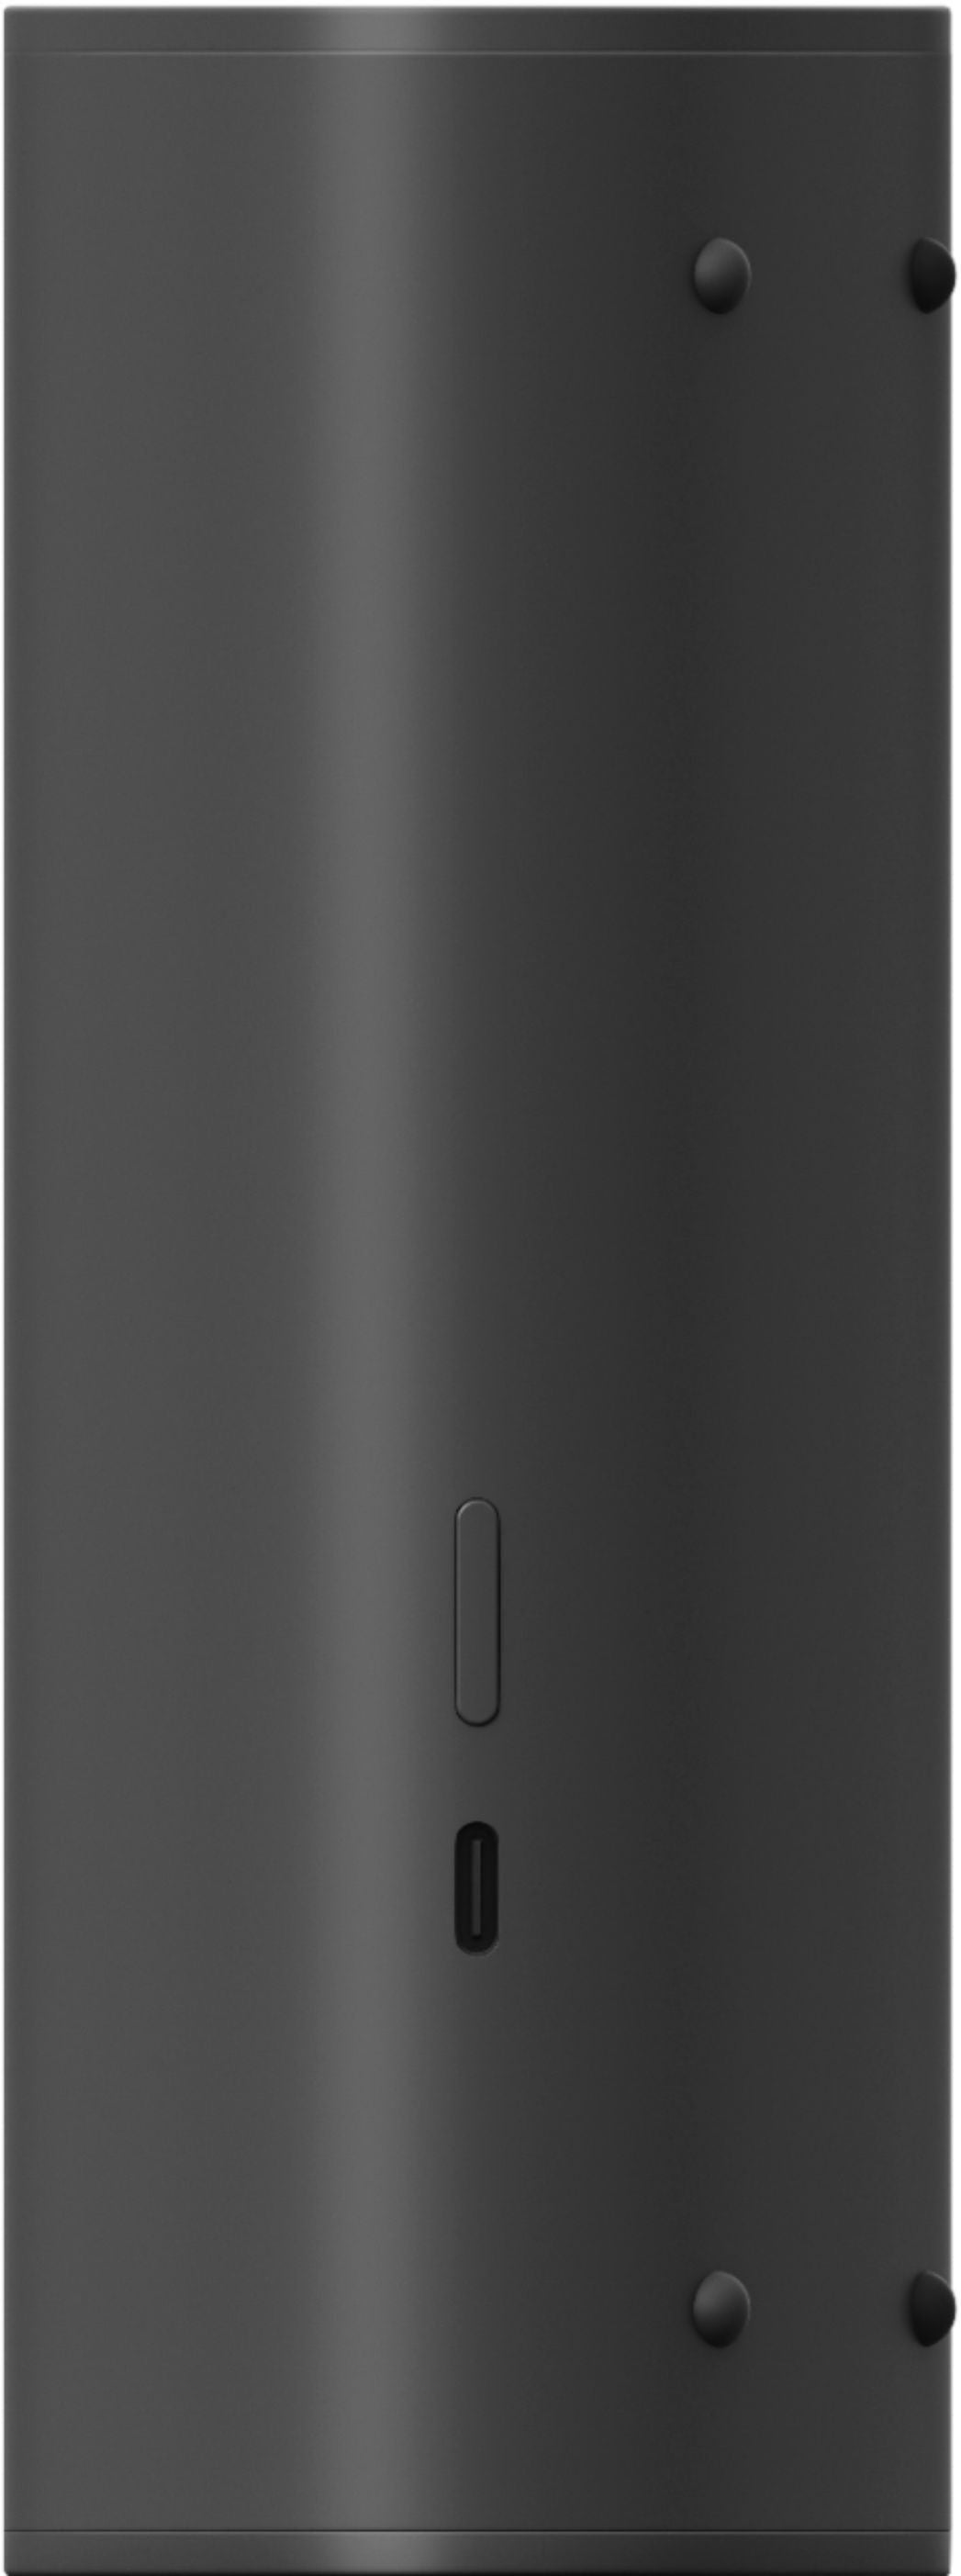 Sonos - Roam Smart Portable Wi-Fi and Bluetooth Speaker with Amazon Alexa and Google Assistant - Black